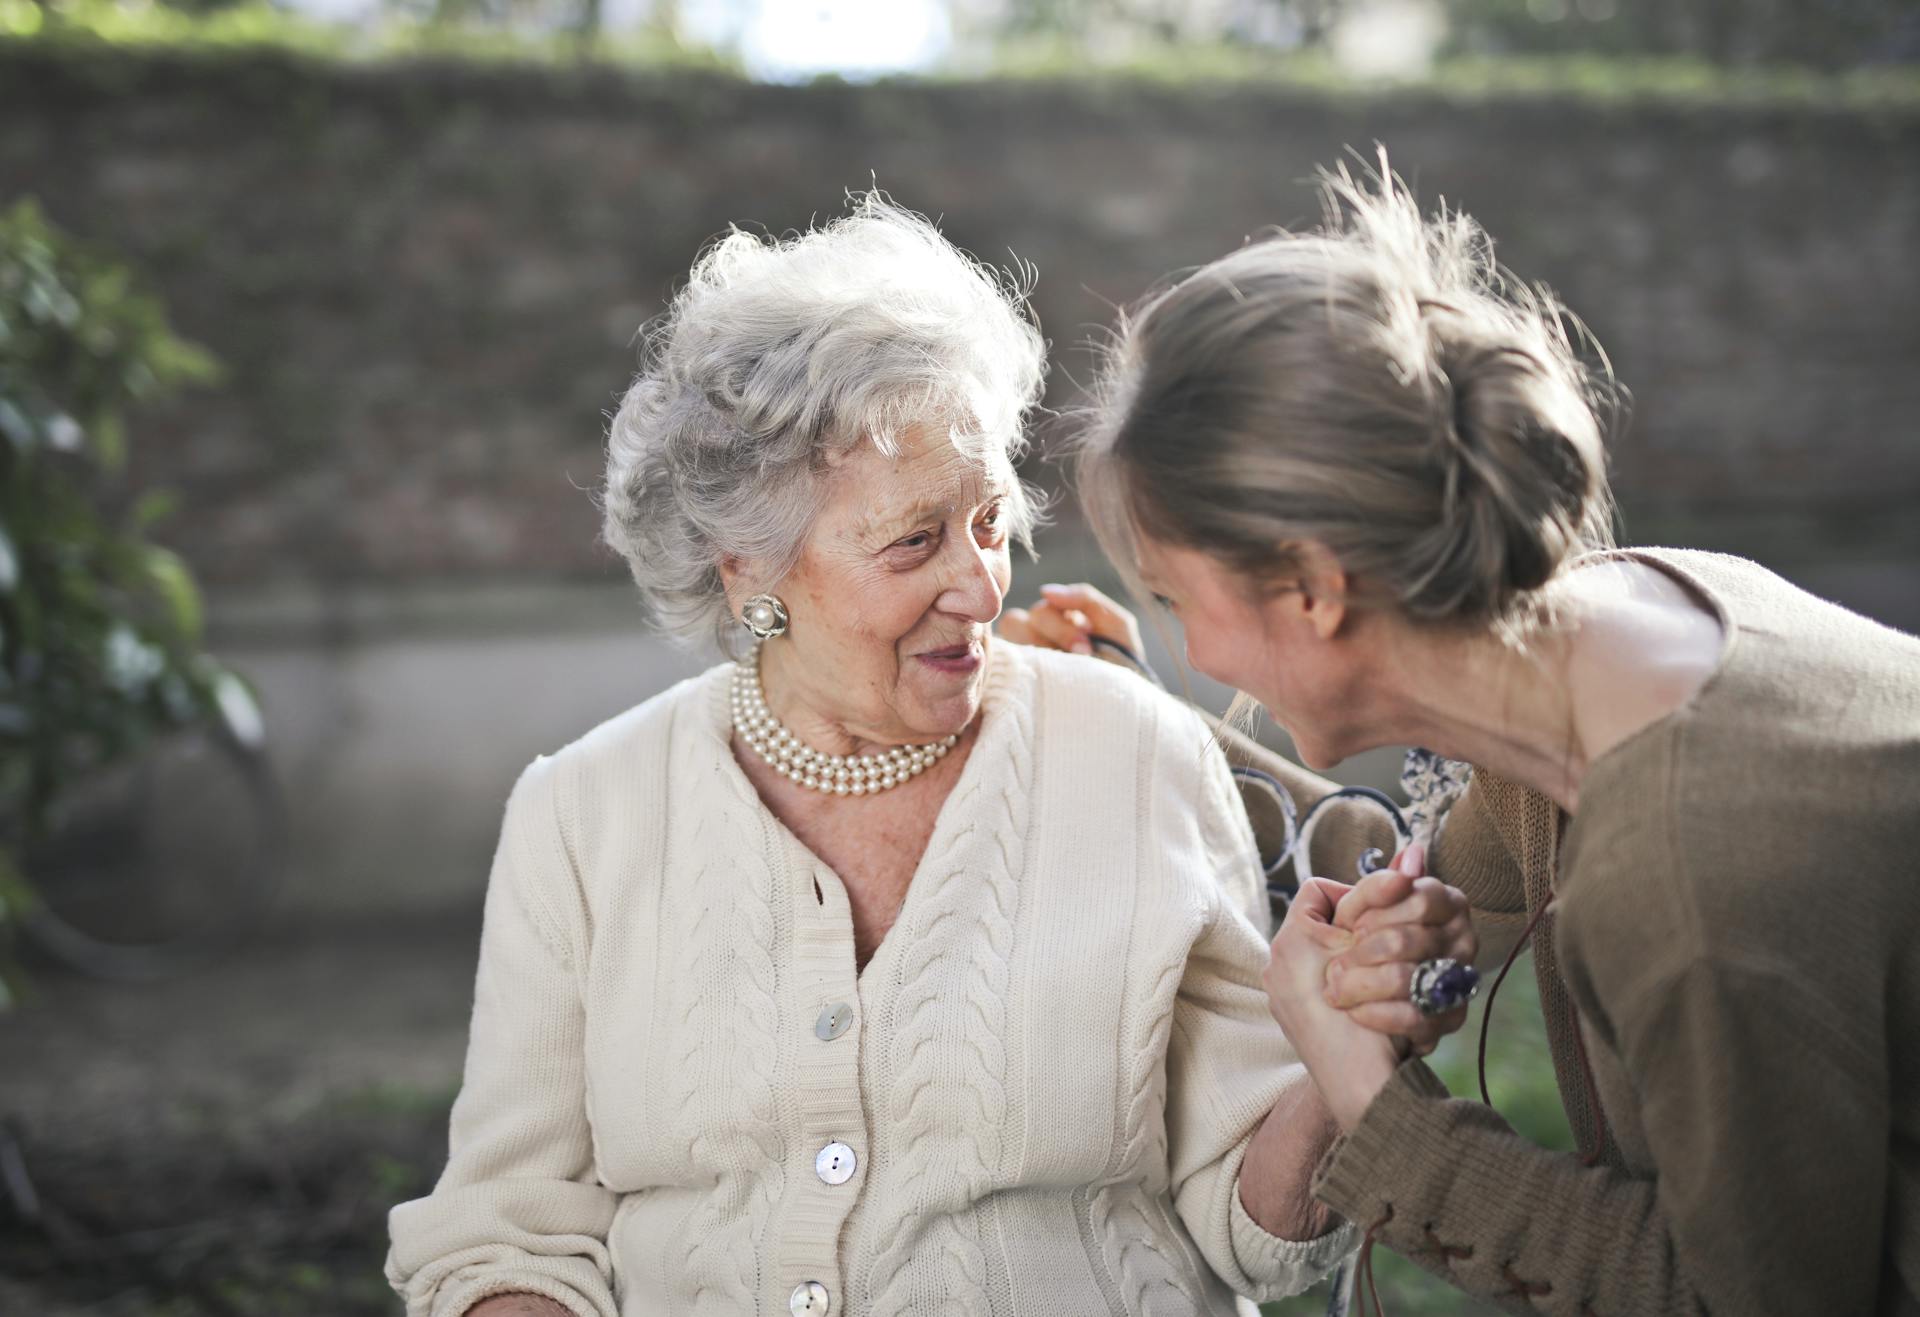 A smiling older woman with a younger woman | Source: Pexels